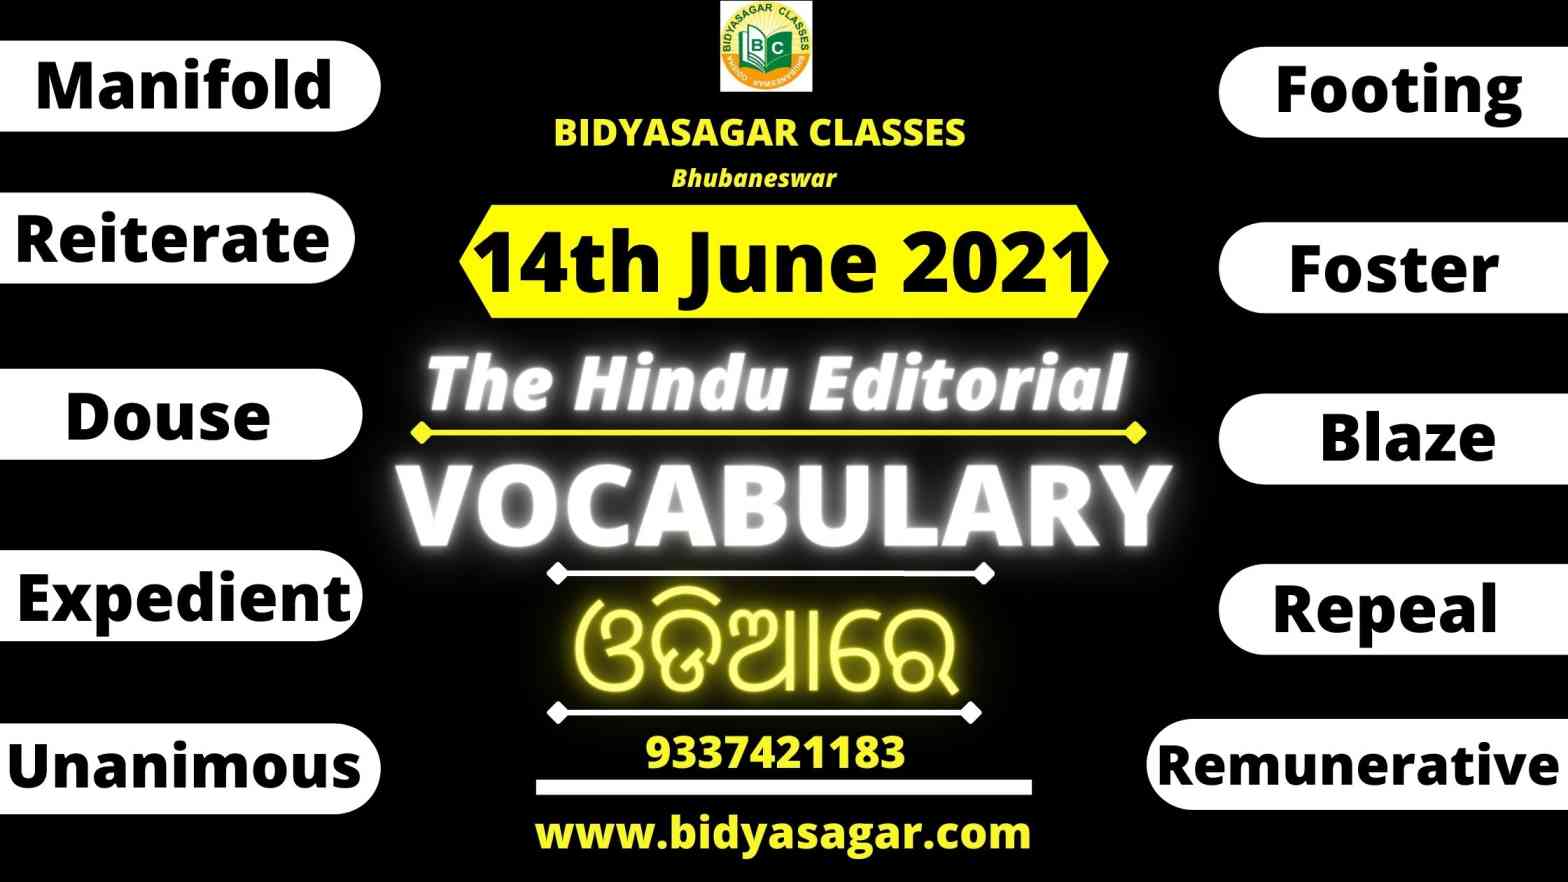 The Hindu Editorial Vocabulary of 14th June 2021